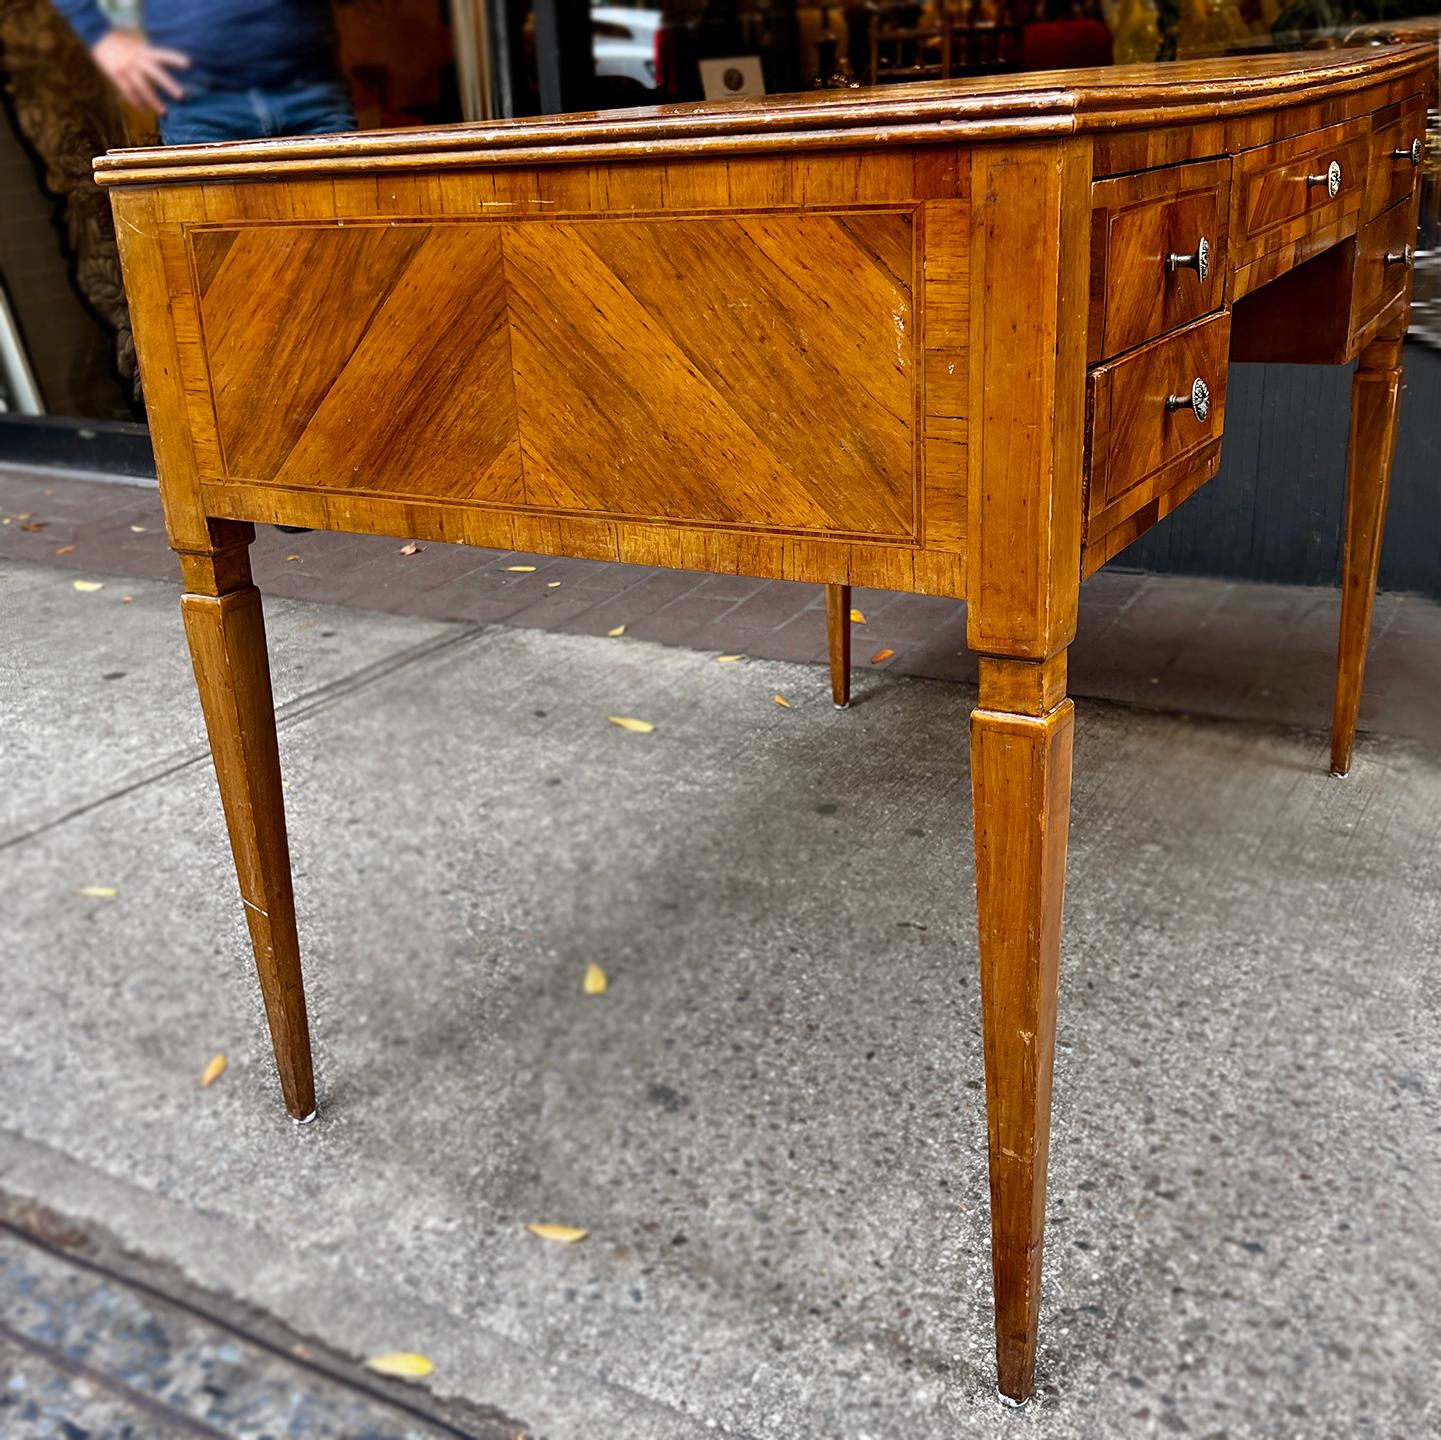 A circa 1940's Italian desk with marquetry top.

Measurements:
Height: 30